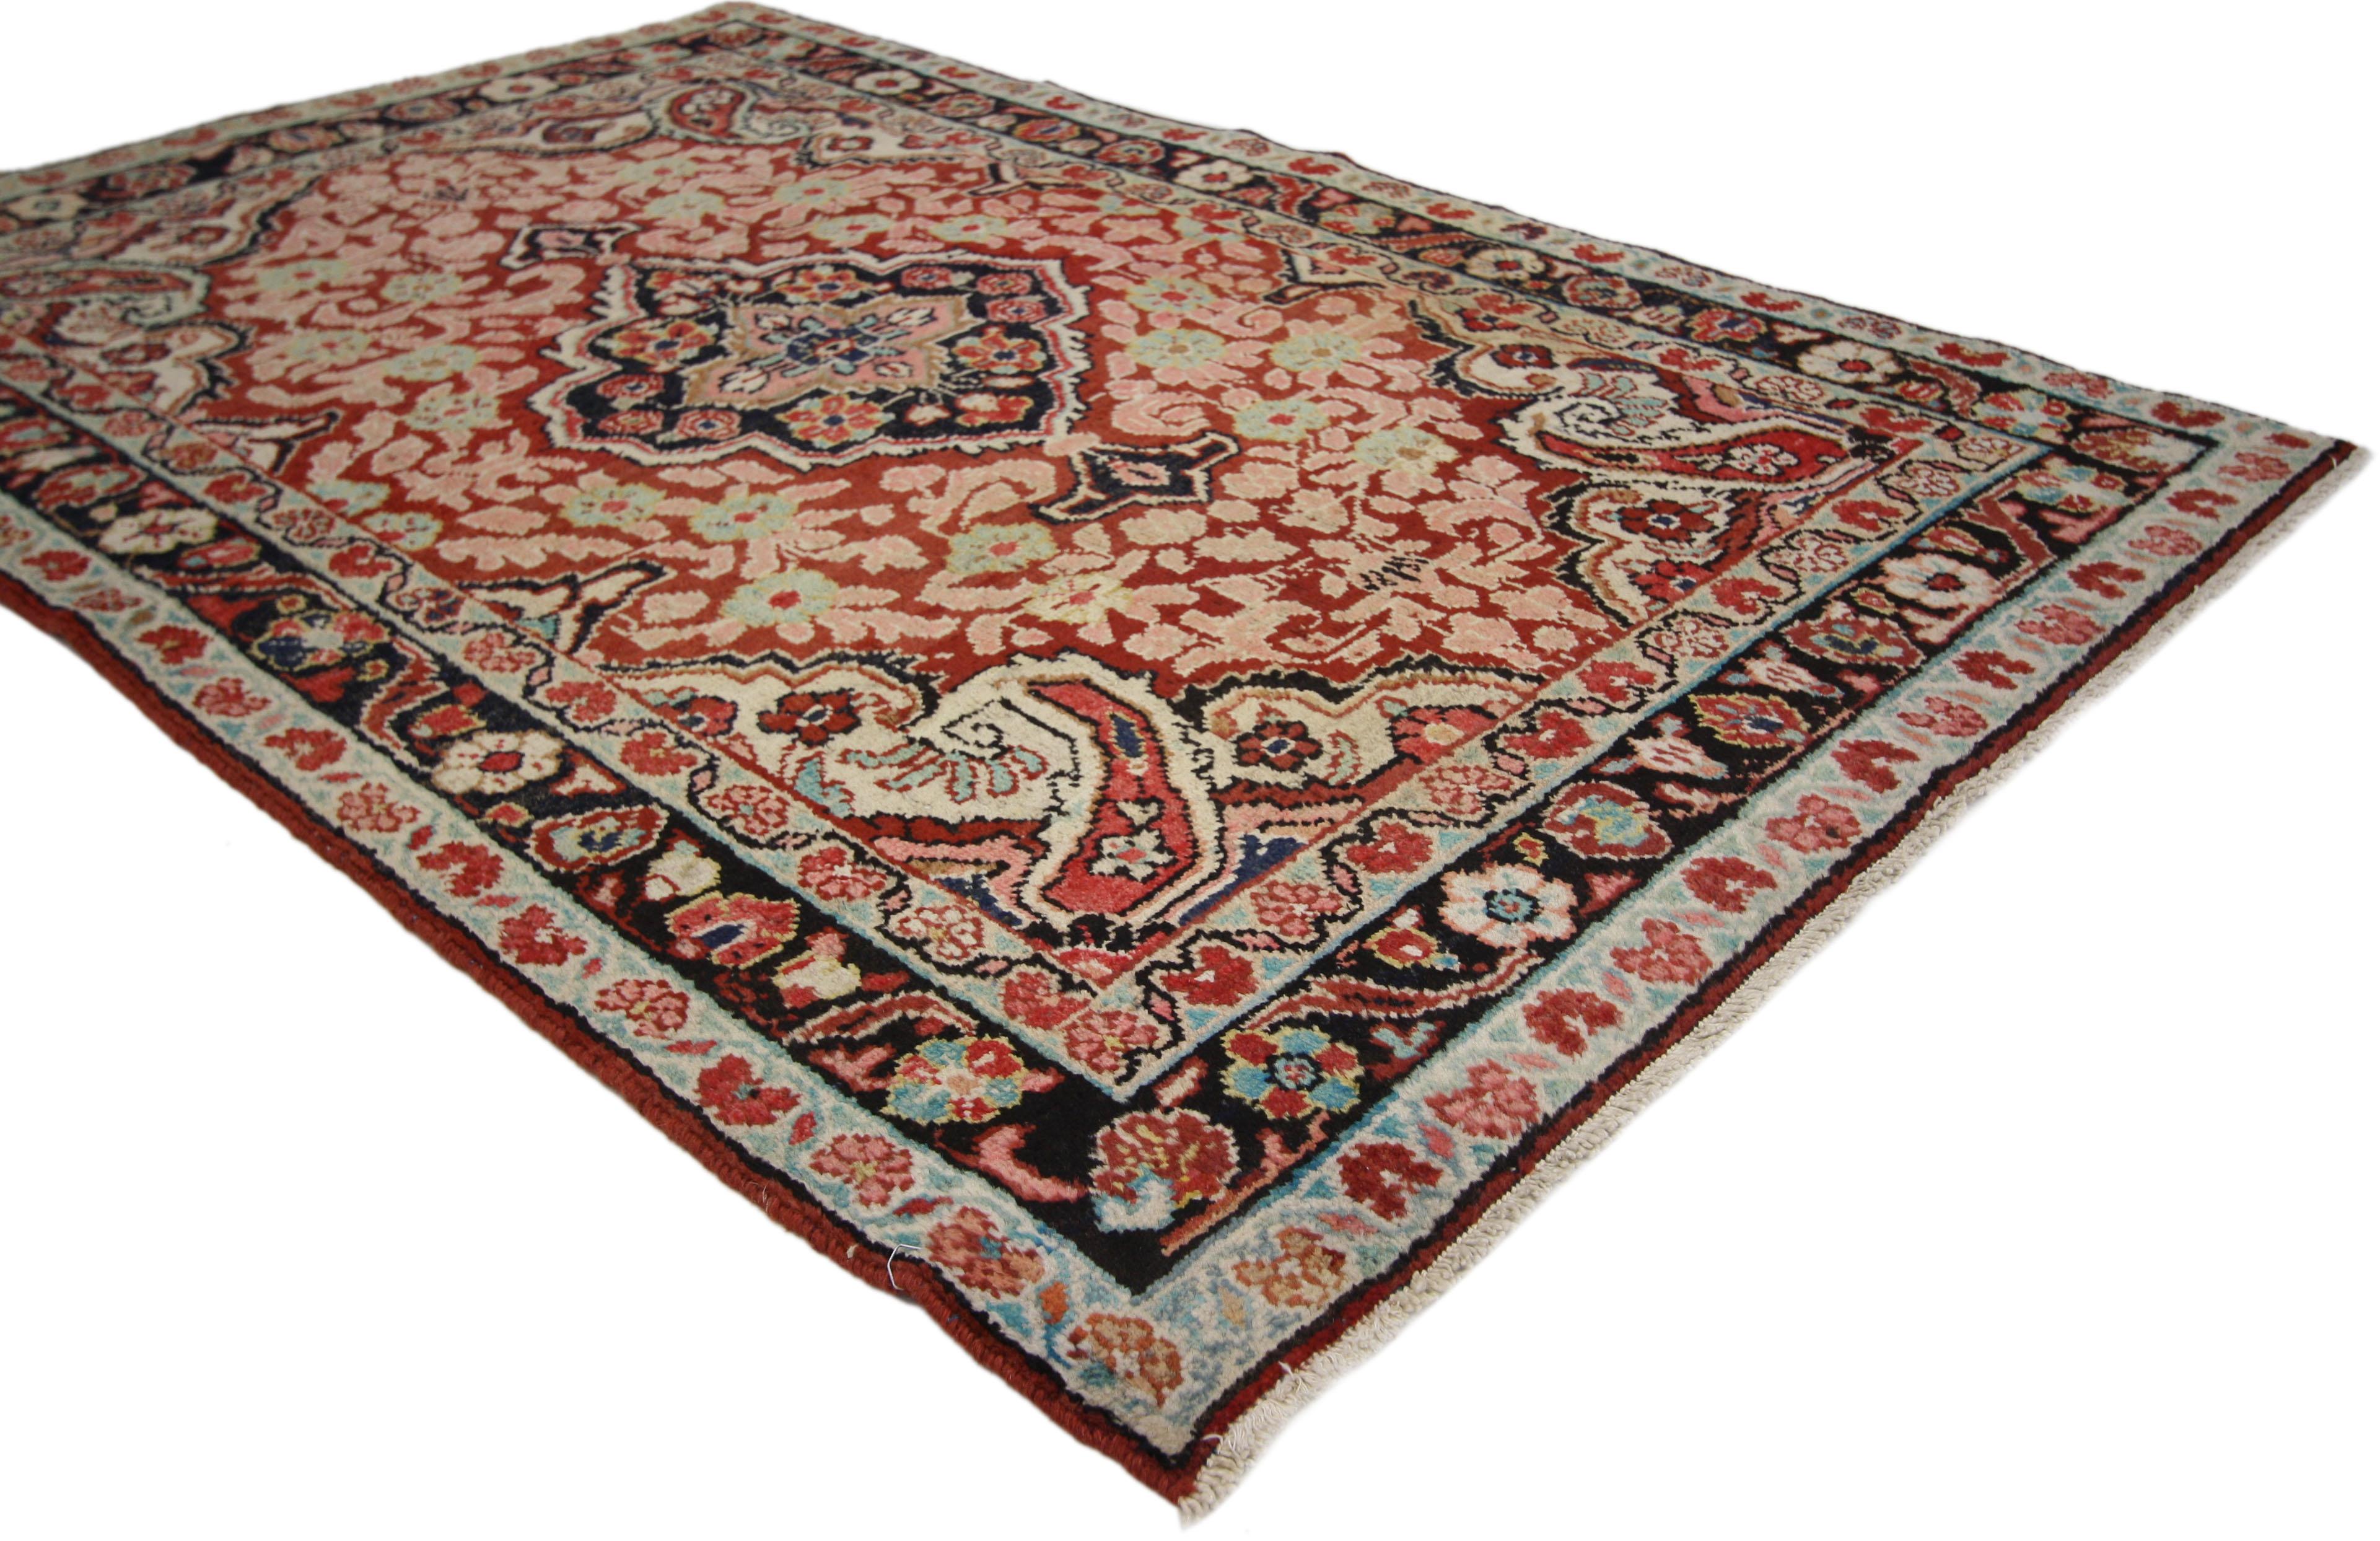 75981 Vintage Persian Mahal Accent Rug with Traditional Victorian Style 04'01 x 06'03. This vintage Persian Mahal accent rug features a diamond-shaped center medallion with trefoil finials and an all-over floral design on a scarlet red field. The